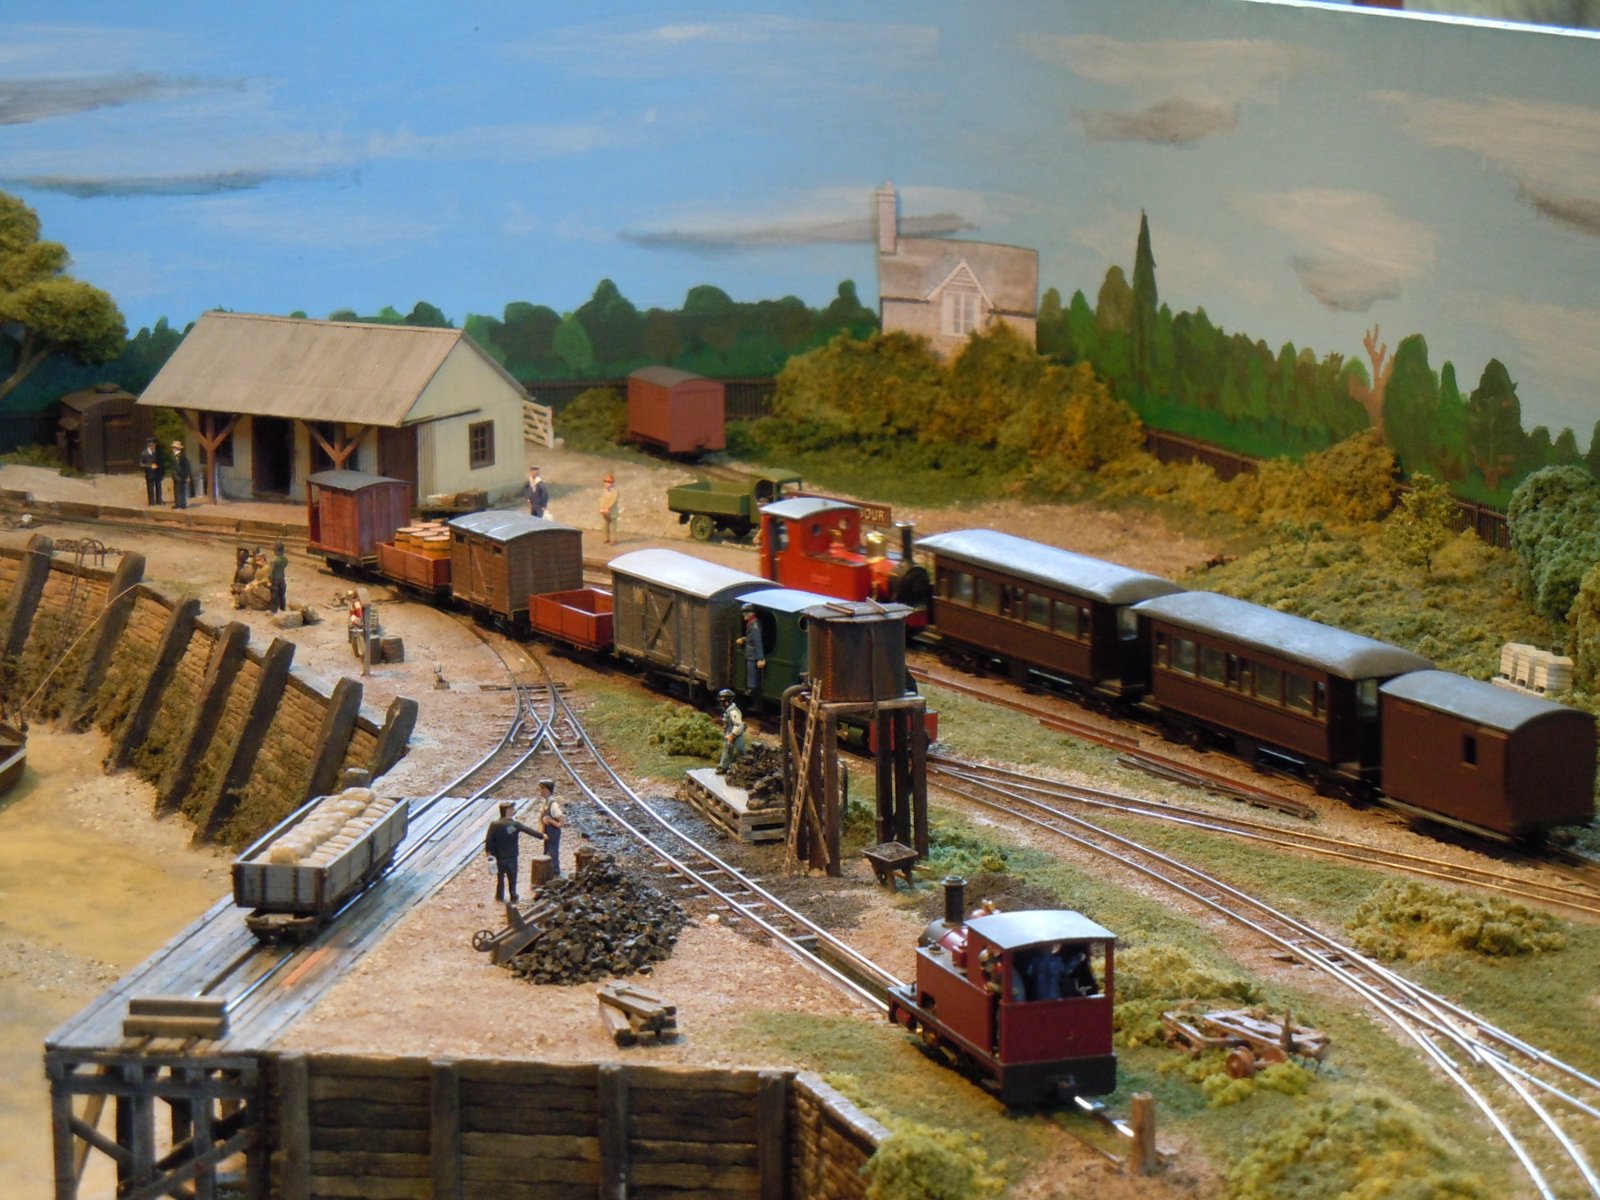 Michael's Model Railways: A family day out in Burgess Hill